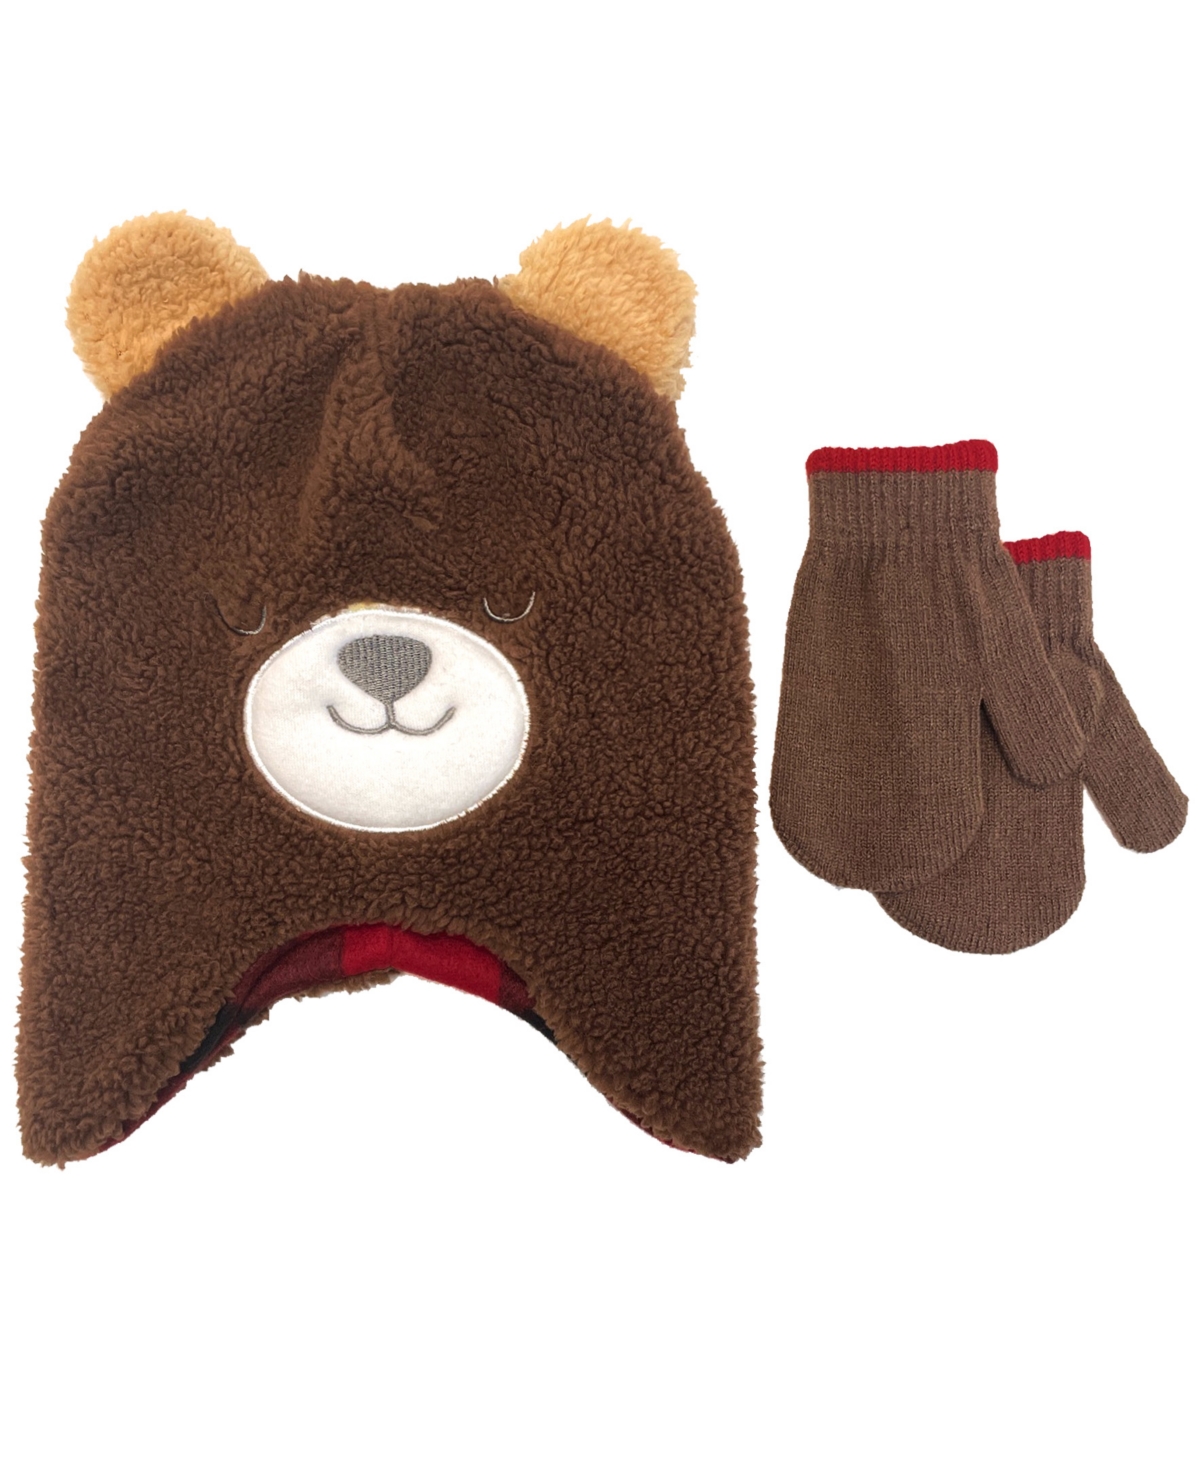 Abg Accessories Toddler Boys Teddy Bear Hat And Mittens, 2 Piece Set In Brown